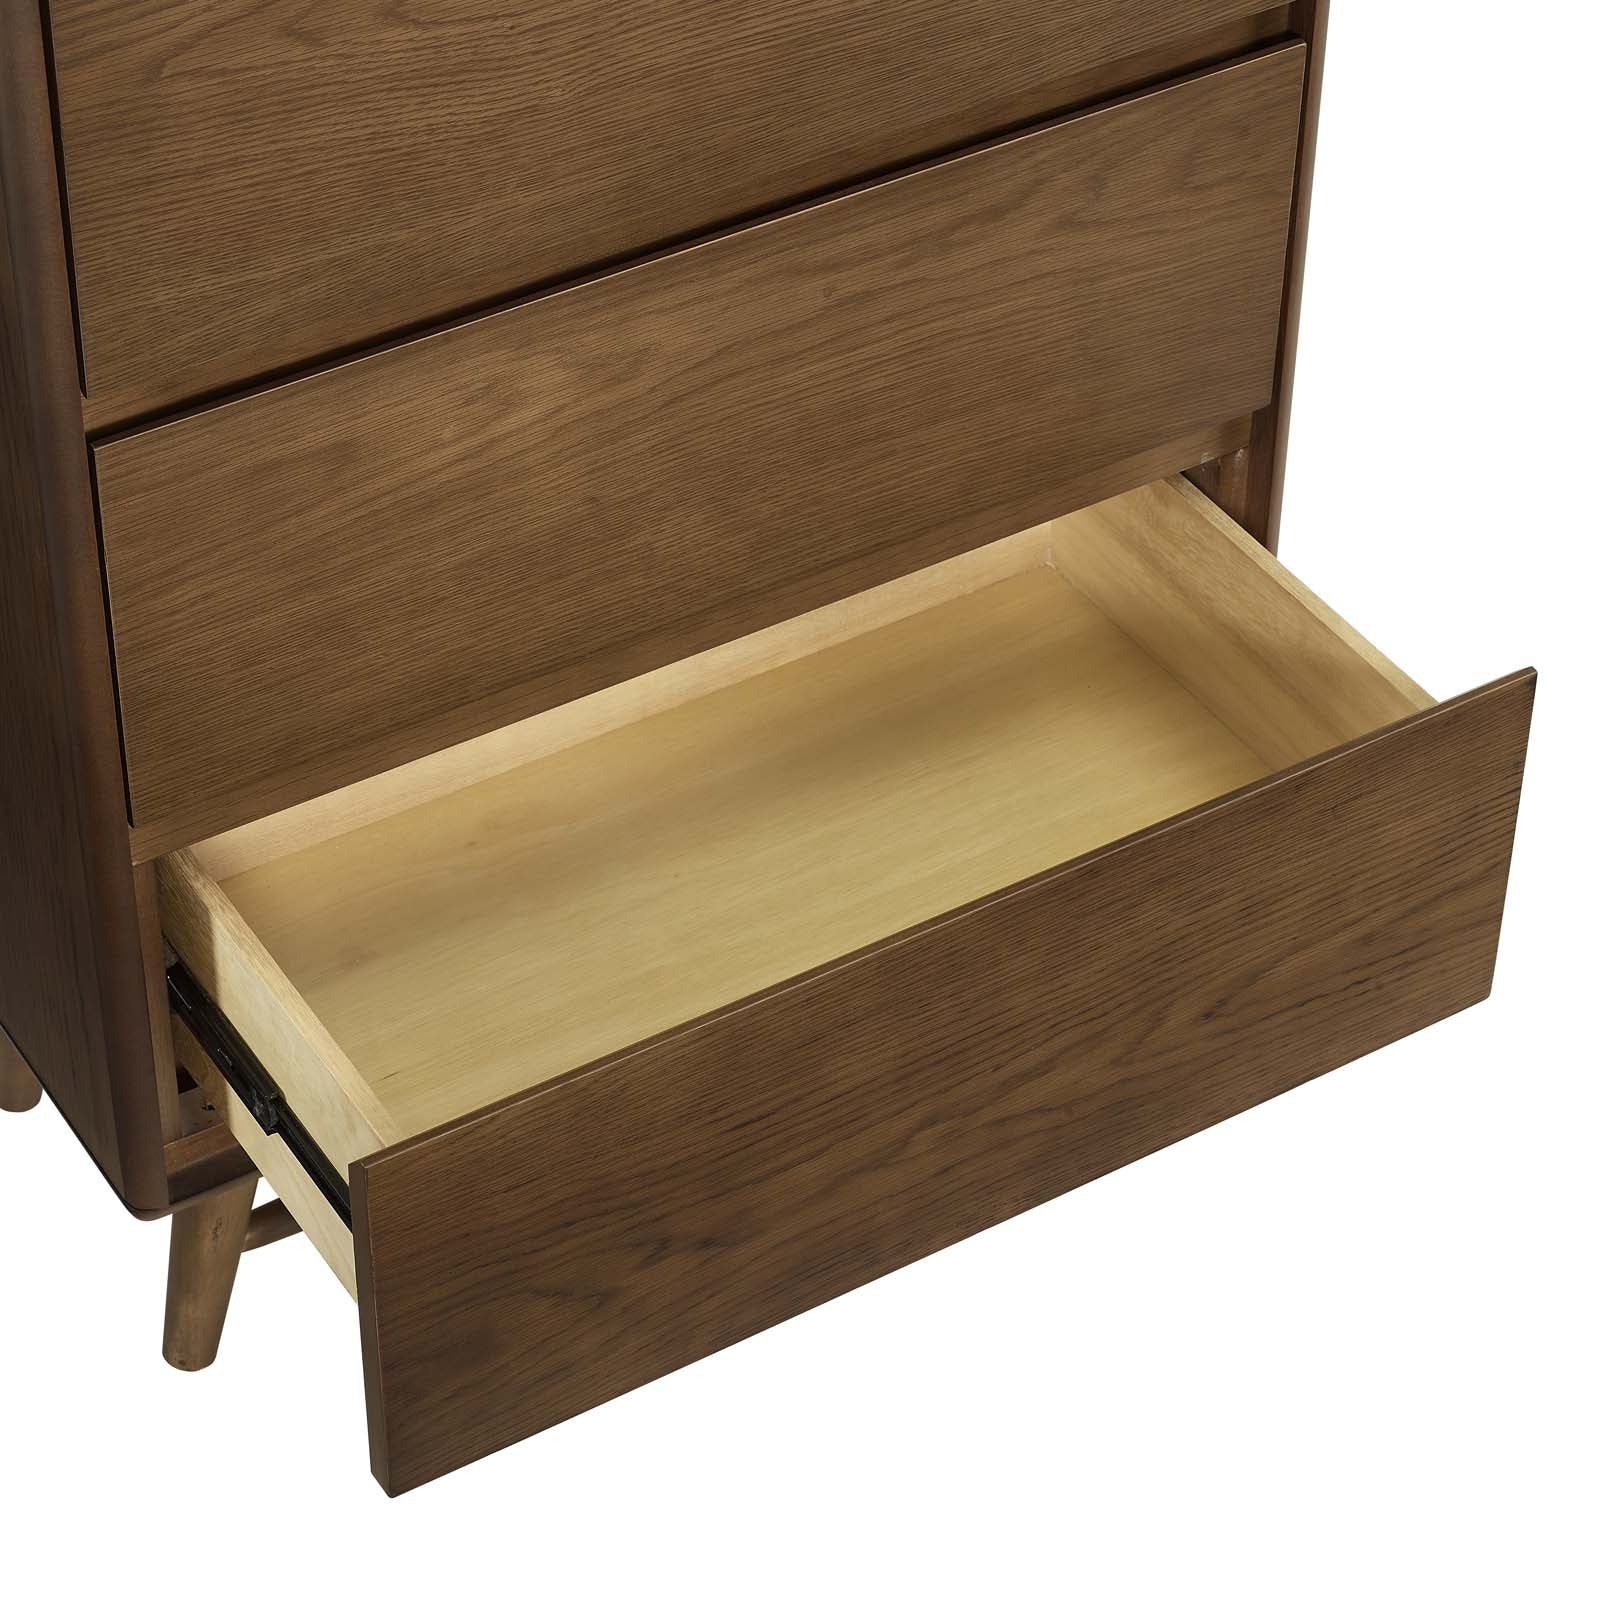 Modway Chest of Drawers - Talwyn Wood Chest Chestnut